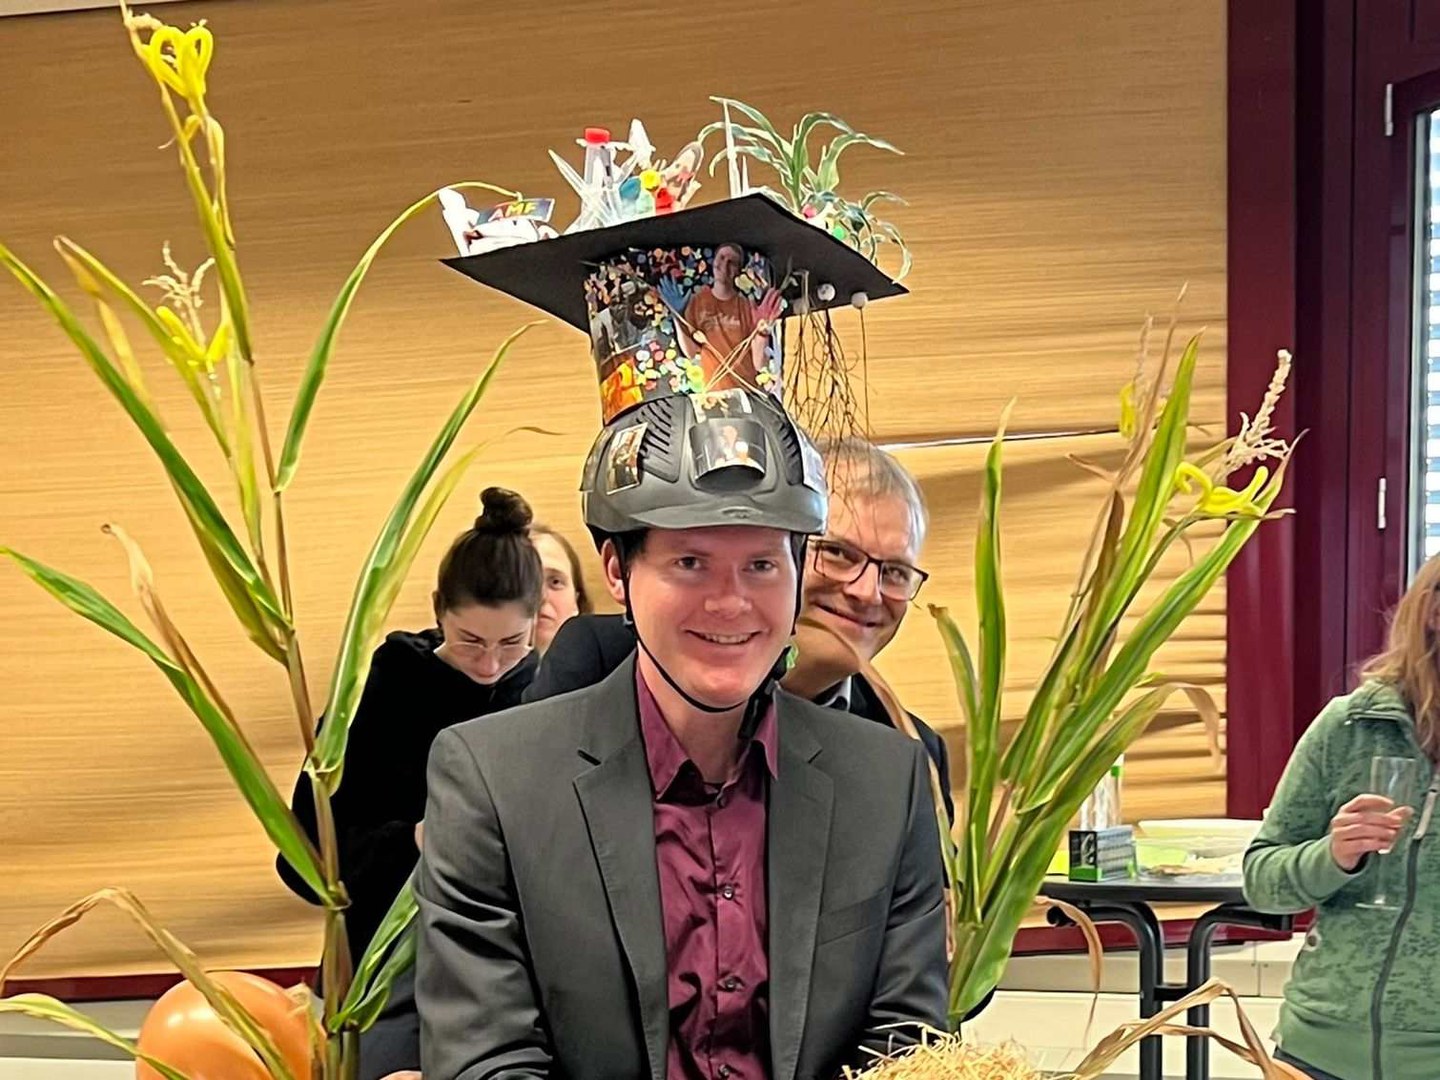 Congratulations to Marcel Baer for the successful completion of his PhD